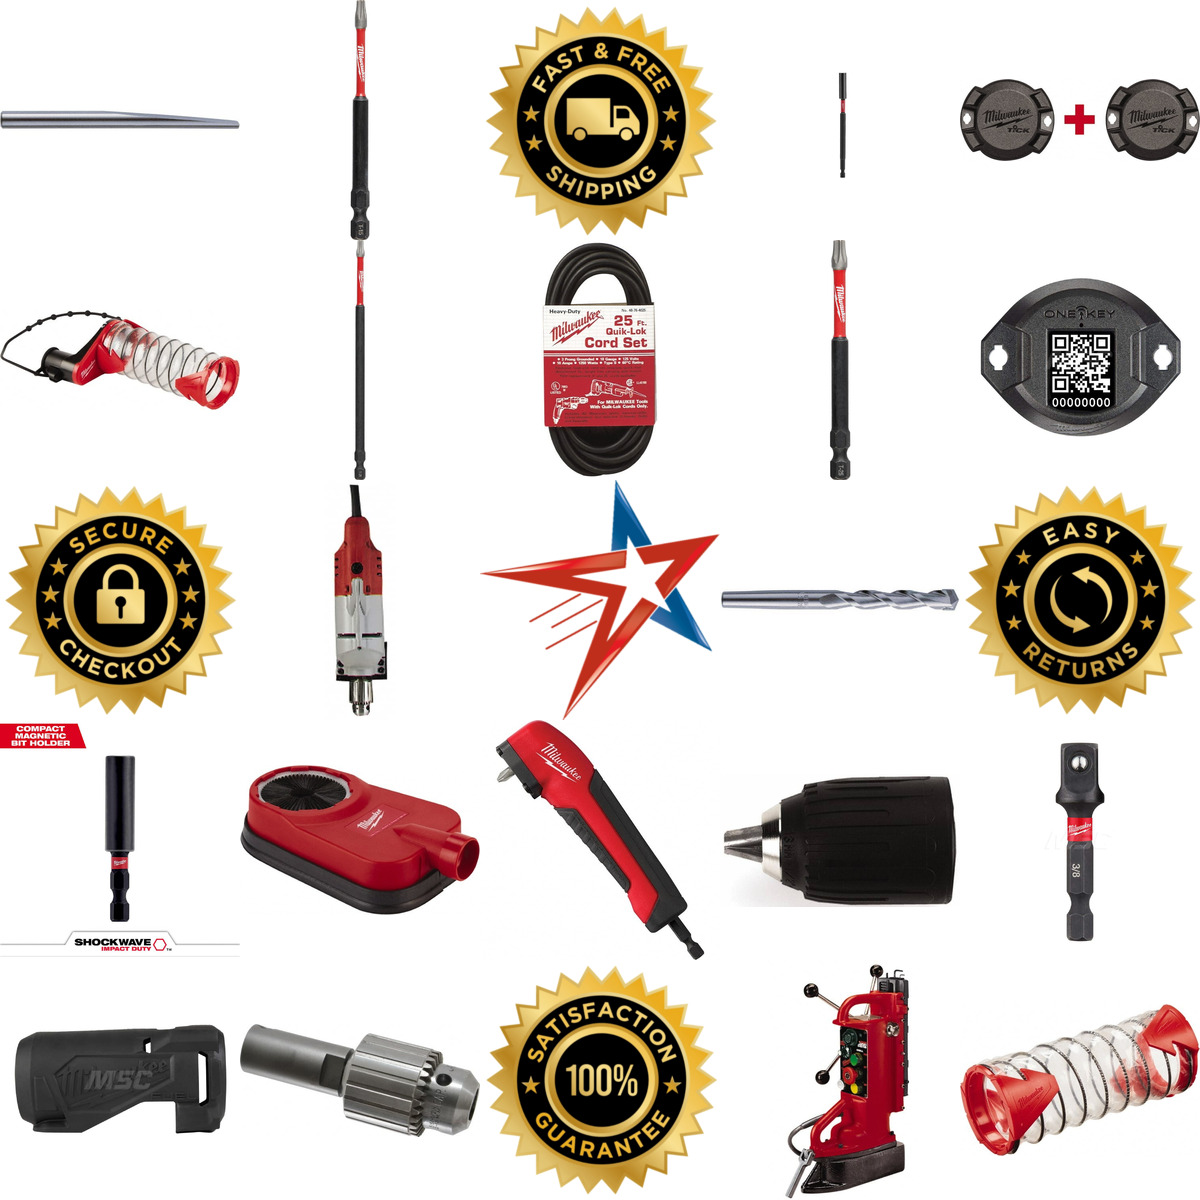 A selection of Milwaukee Tool products on GoVets